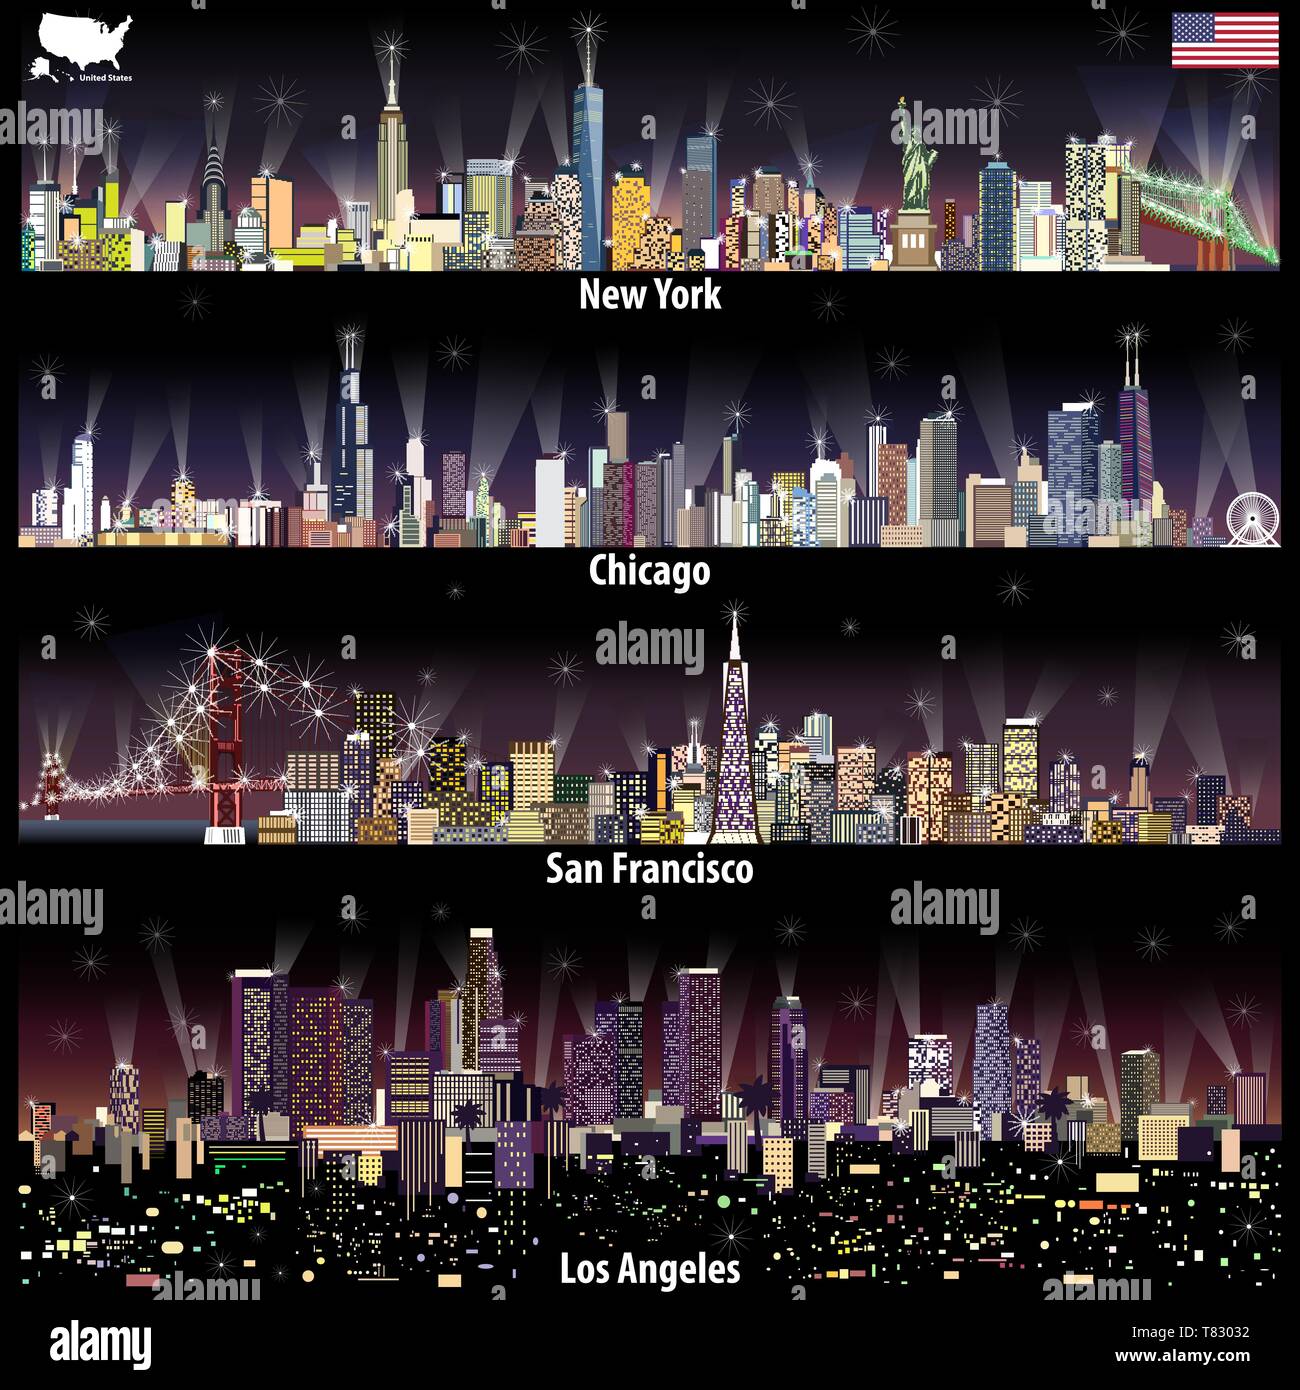 abstract vector illustrations of United States city skylines Stock Vector